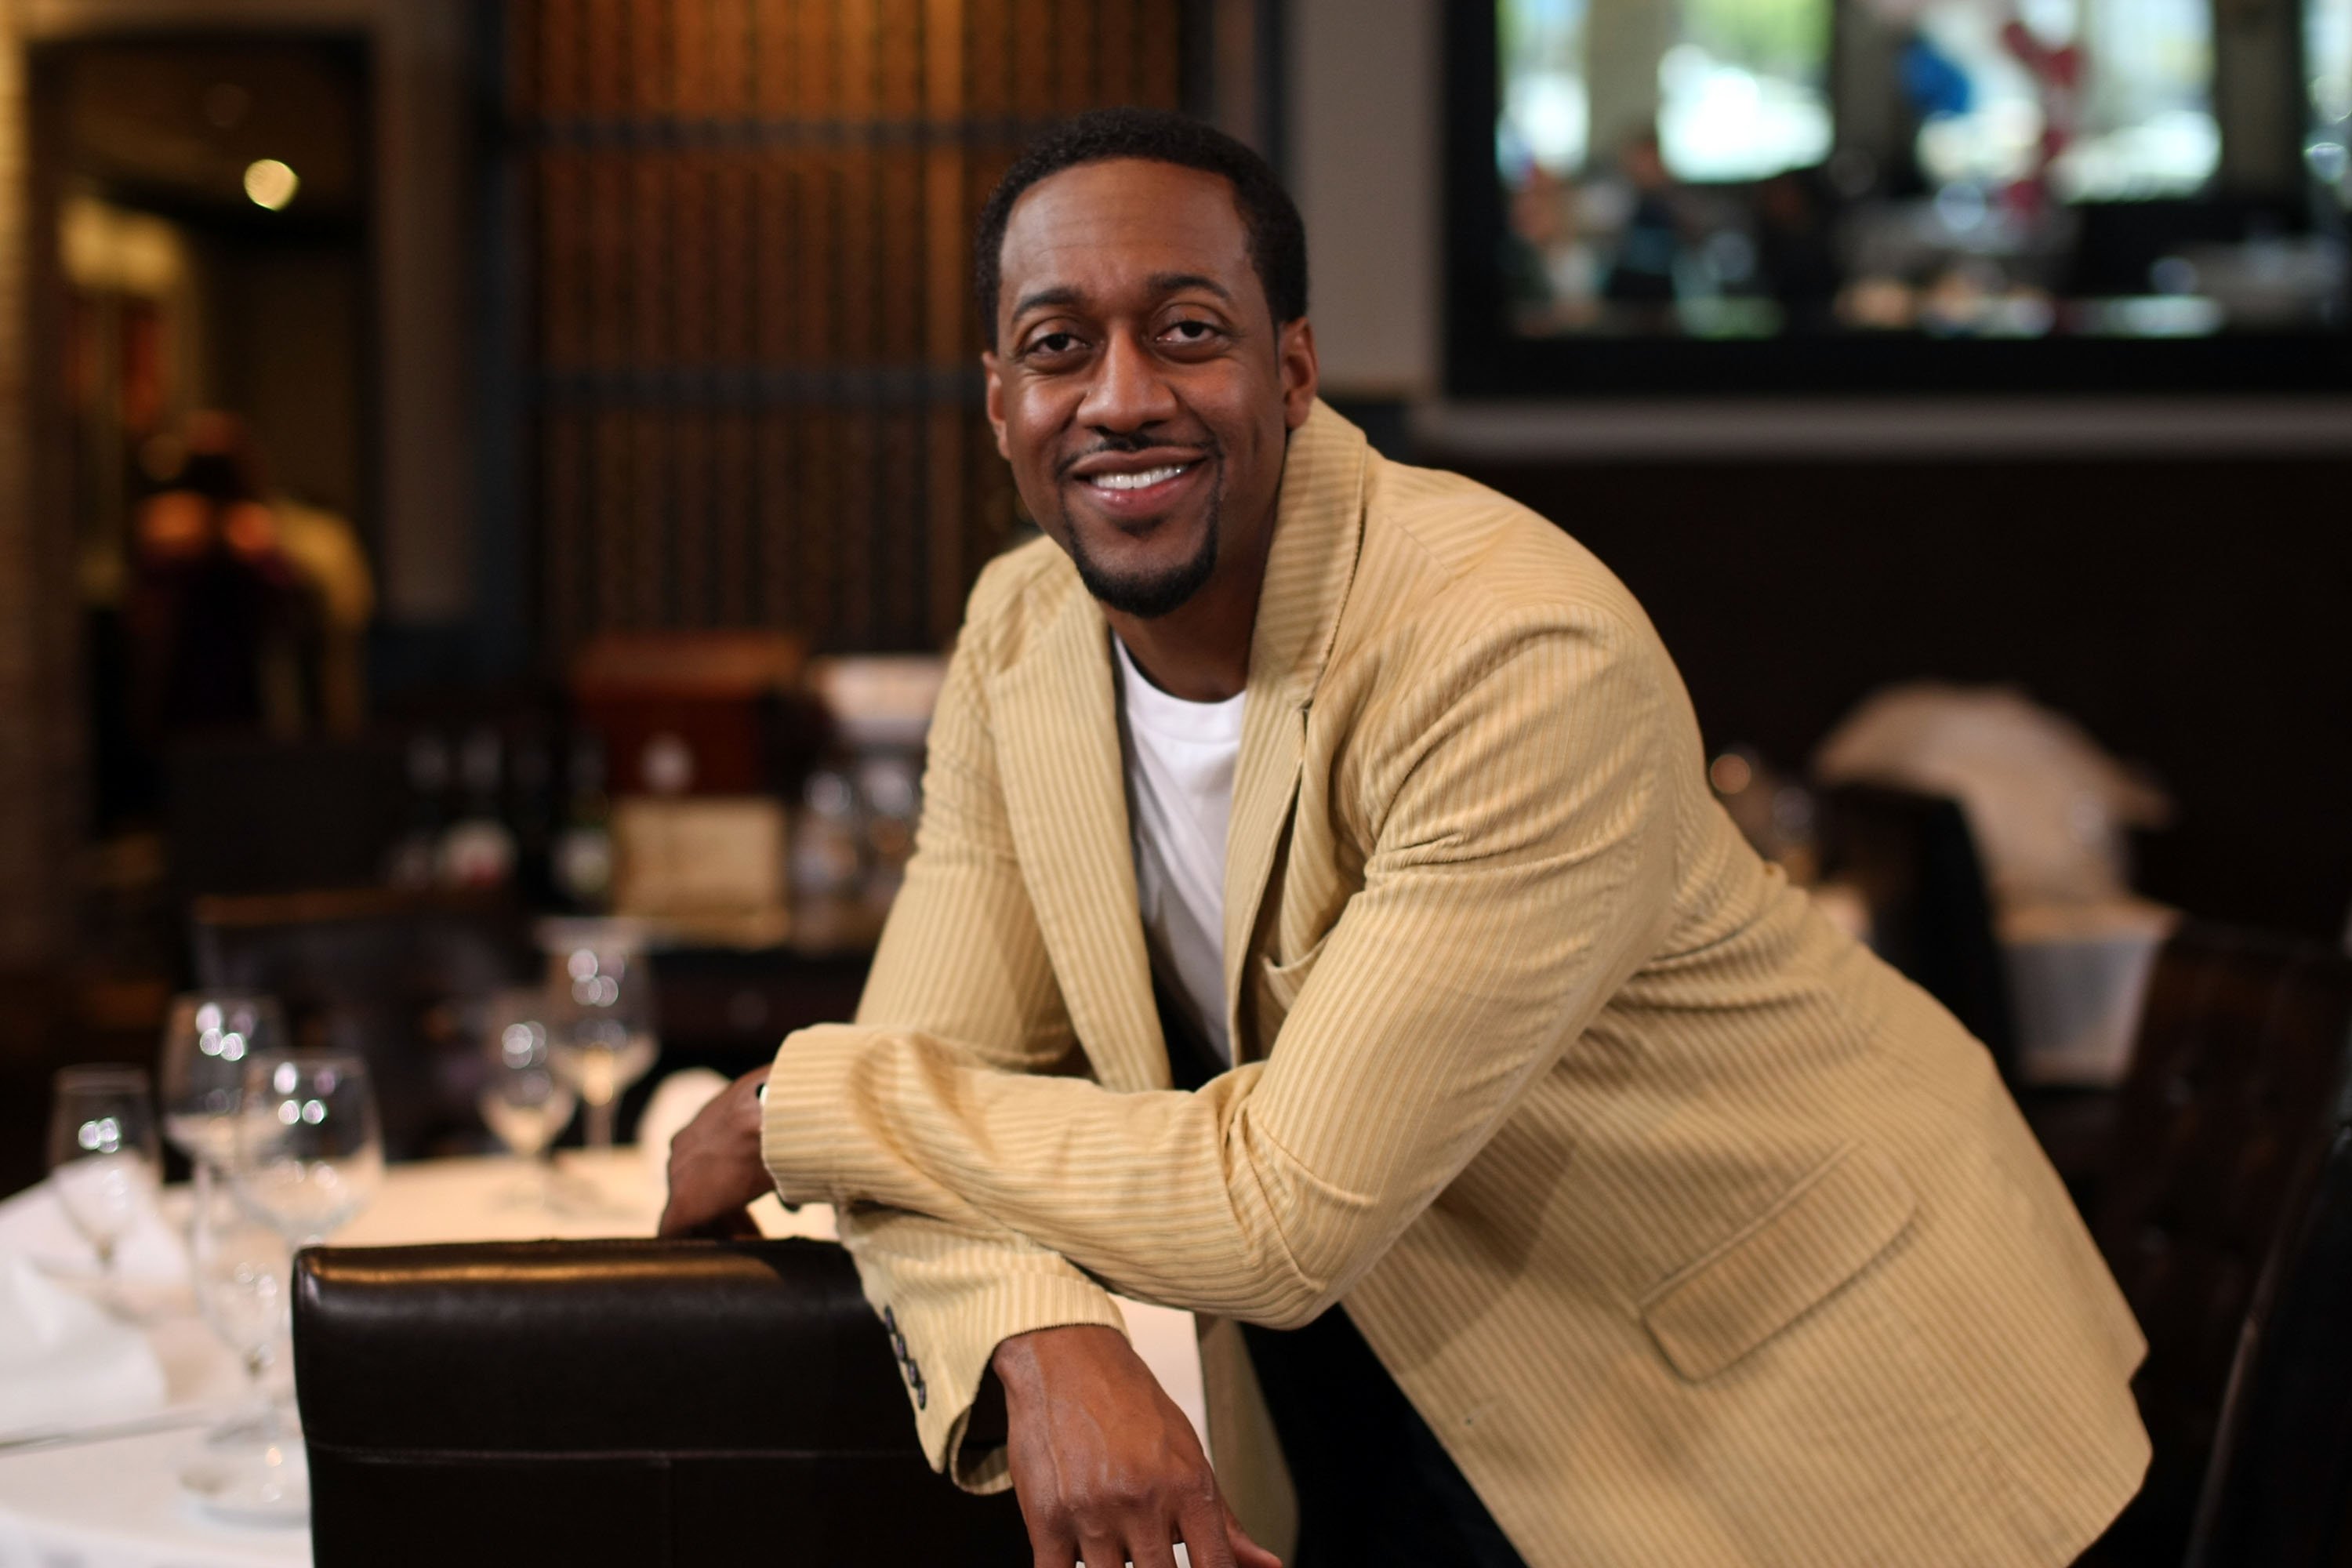 Jaleel White on the set of "Road To The Altar" on April 4, 2009 in Encino, California. | Source: Getty Images